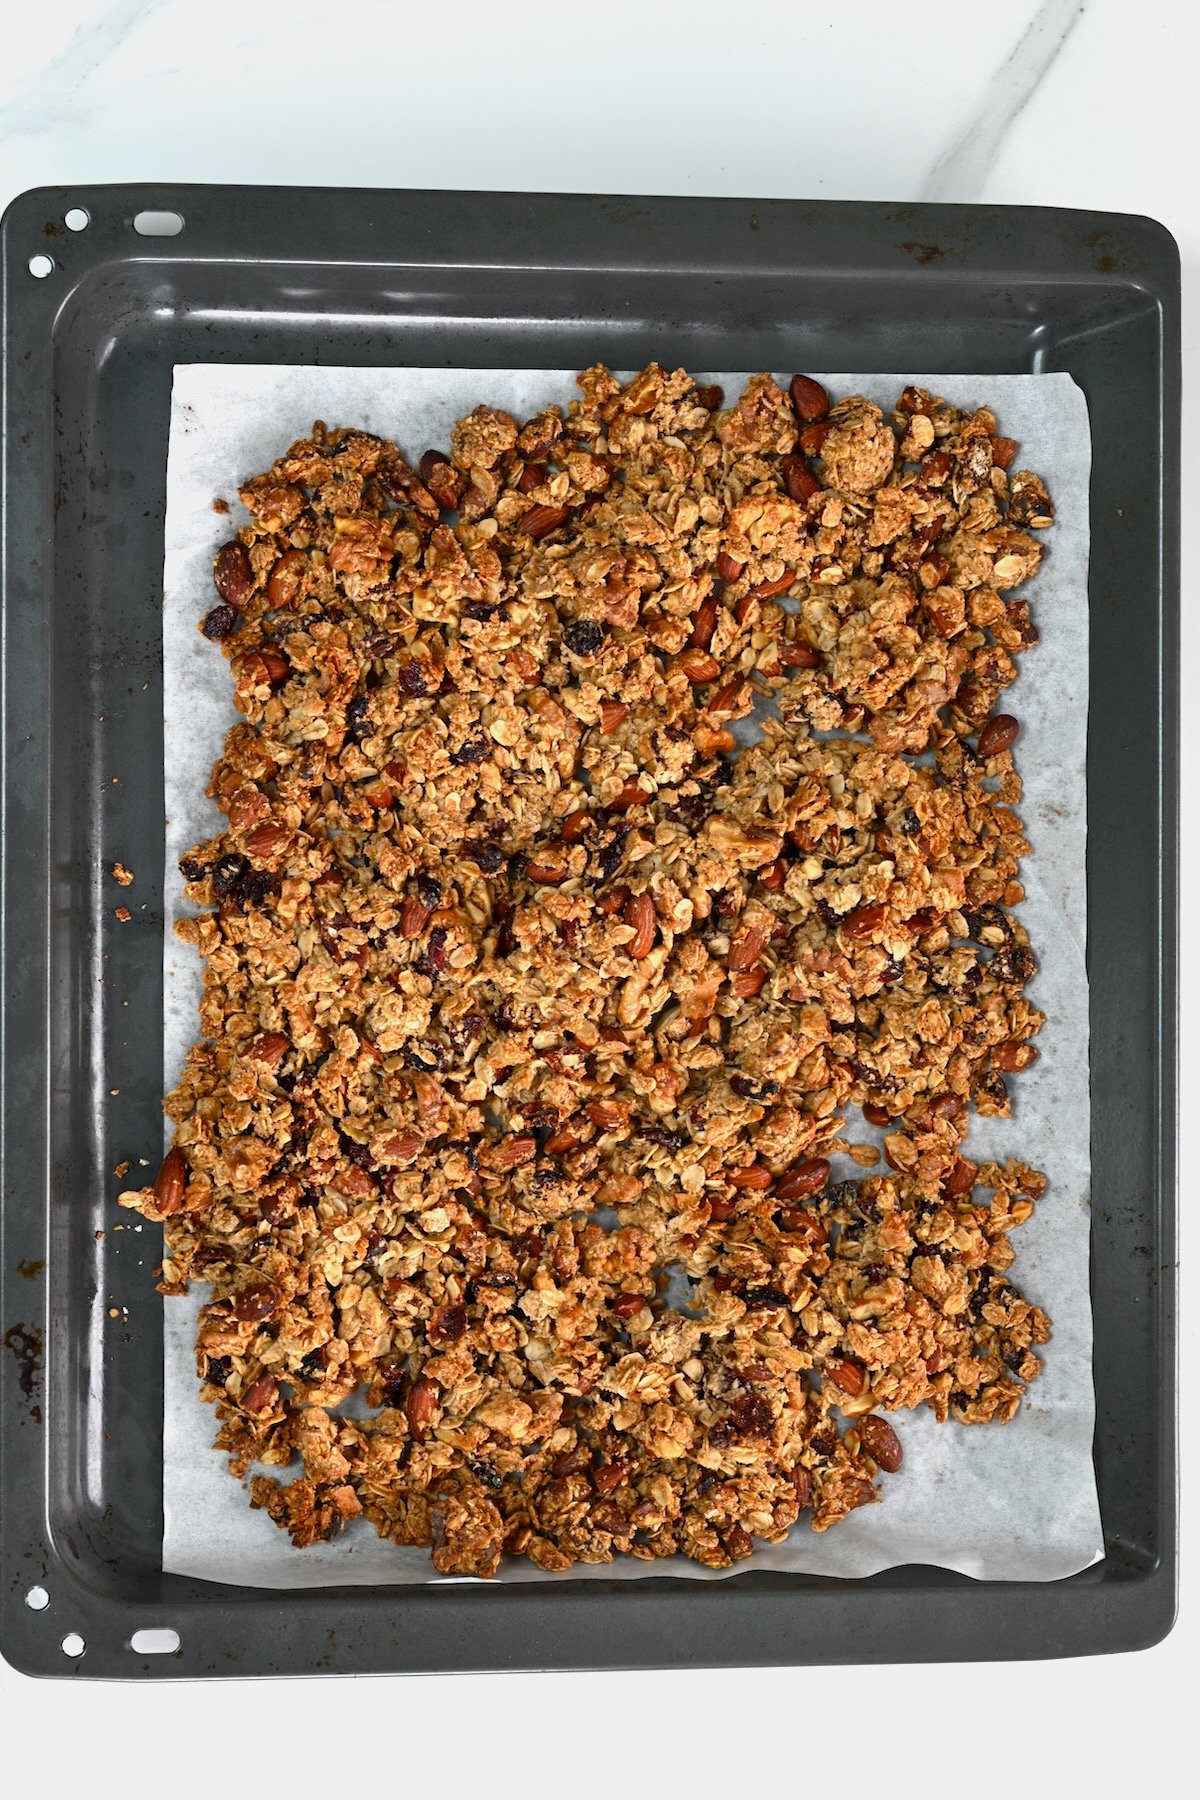 Home baked granola in a tray